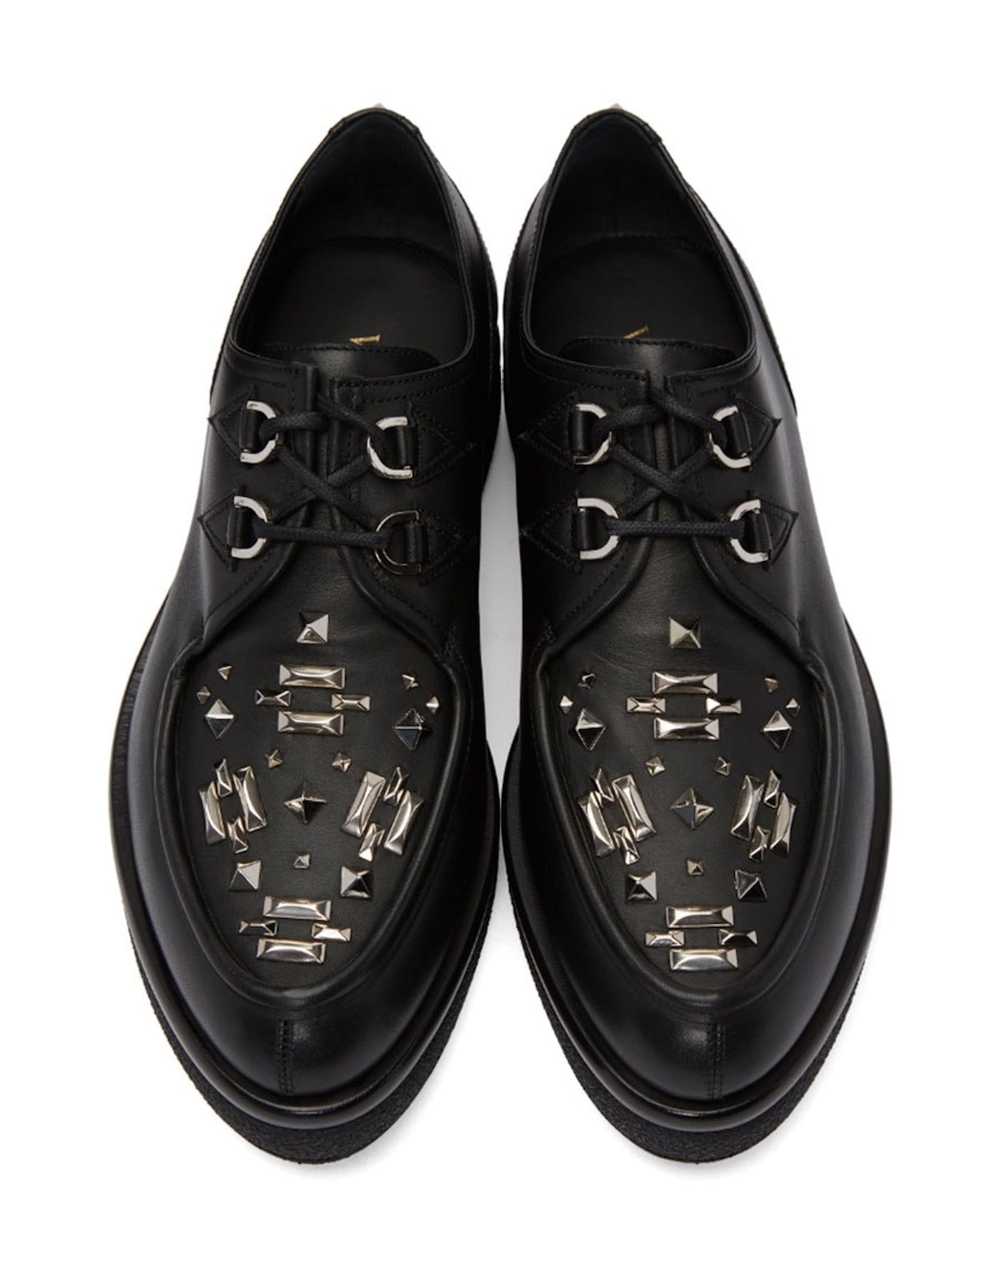 Valentino Black Leather Studded Creepers - image 7